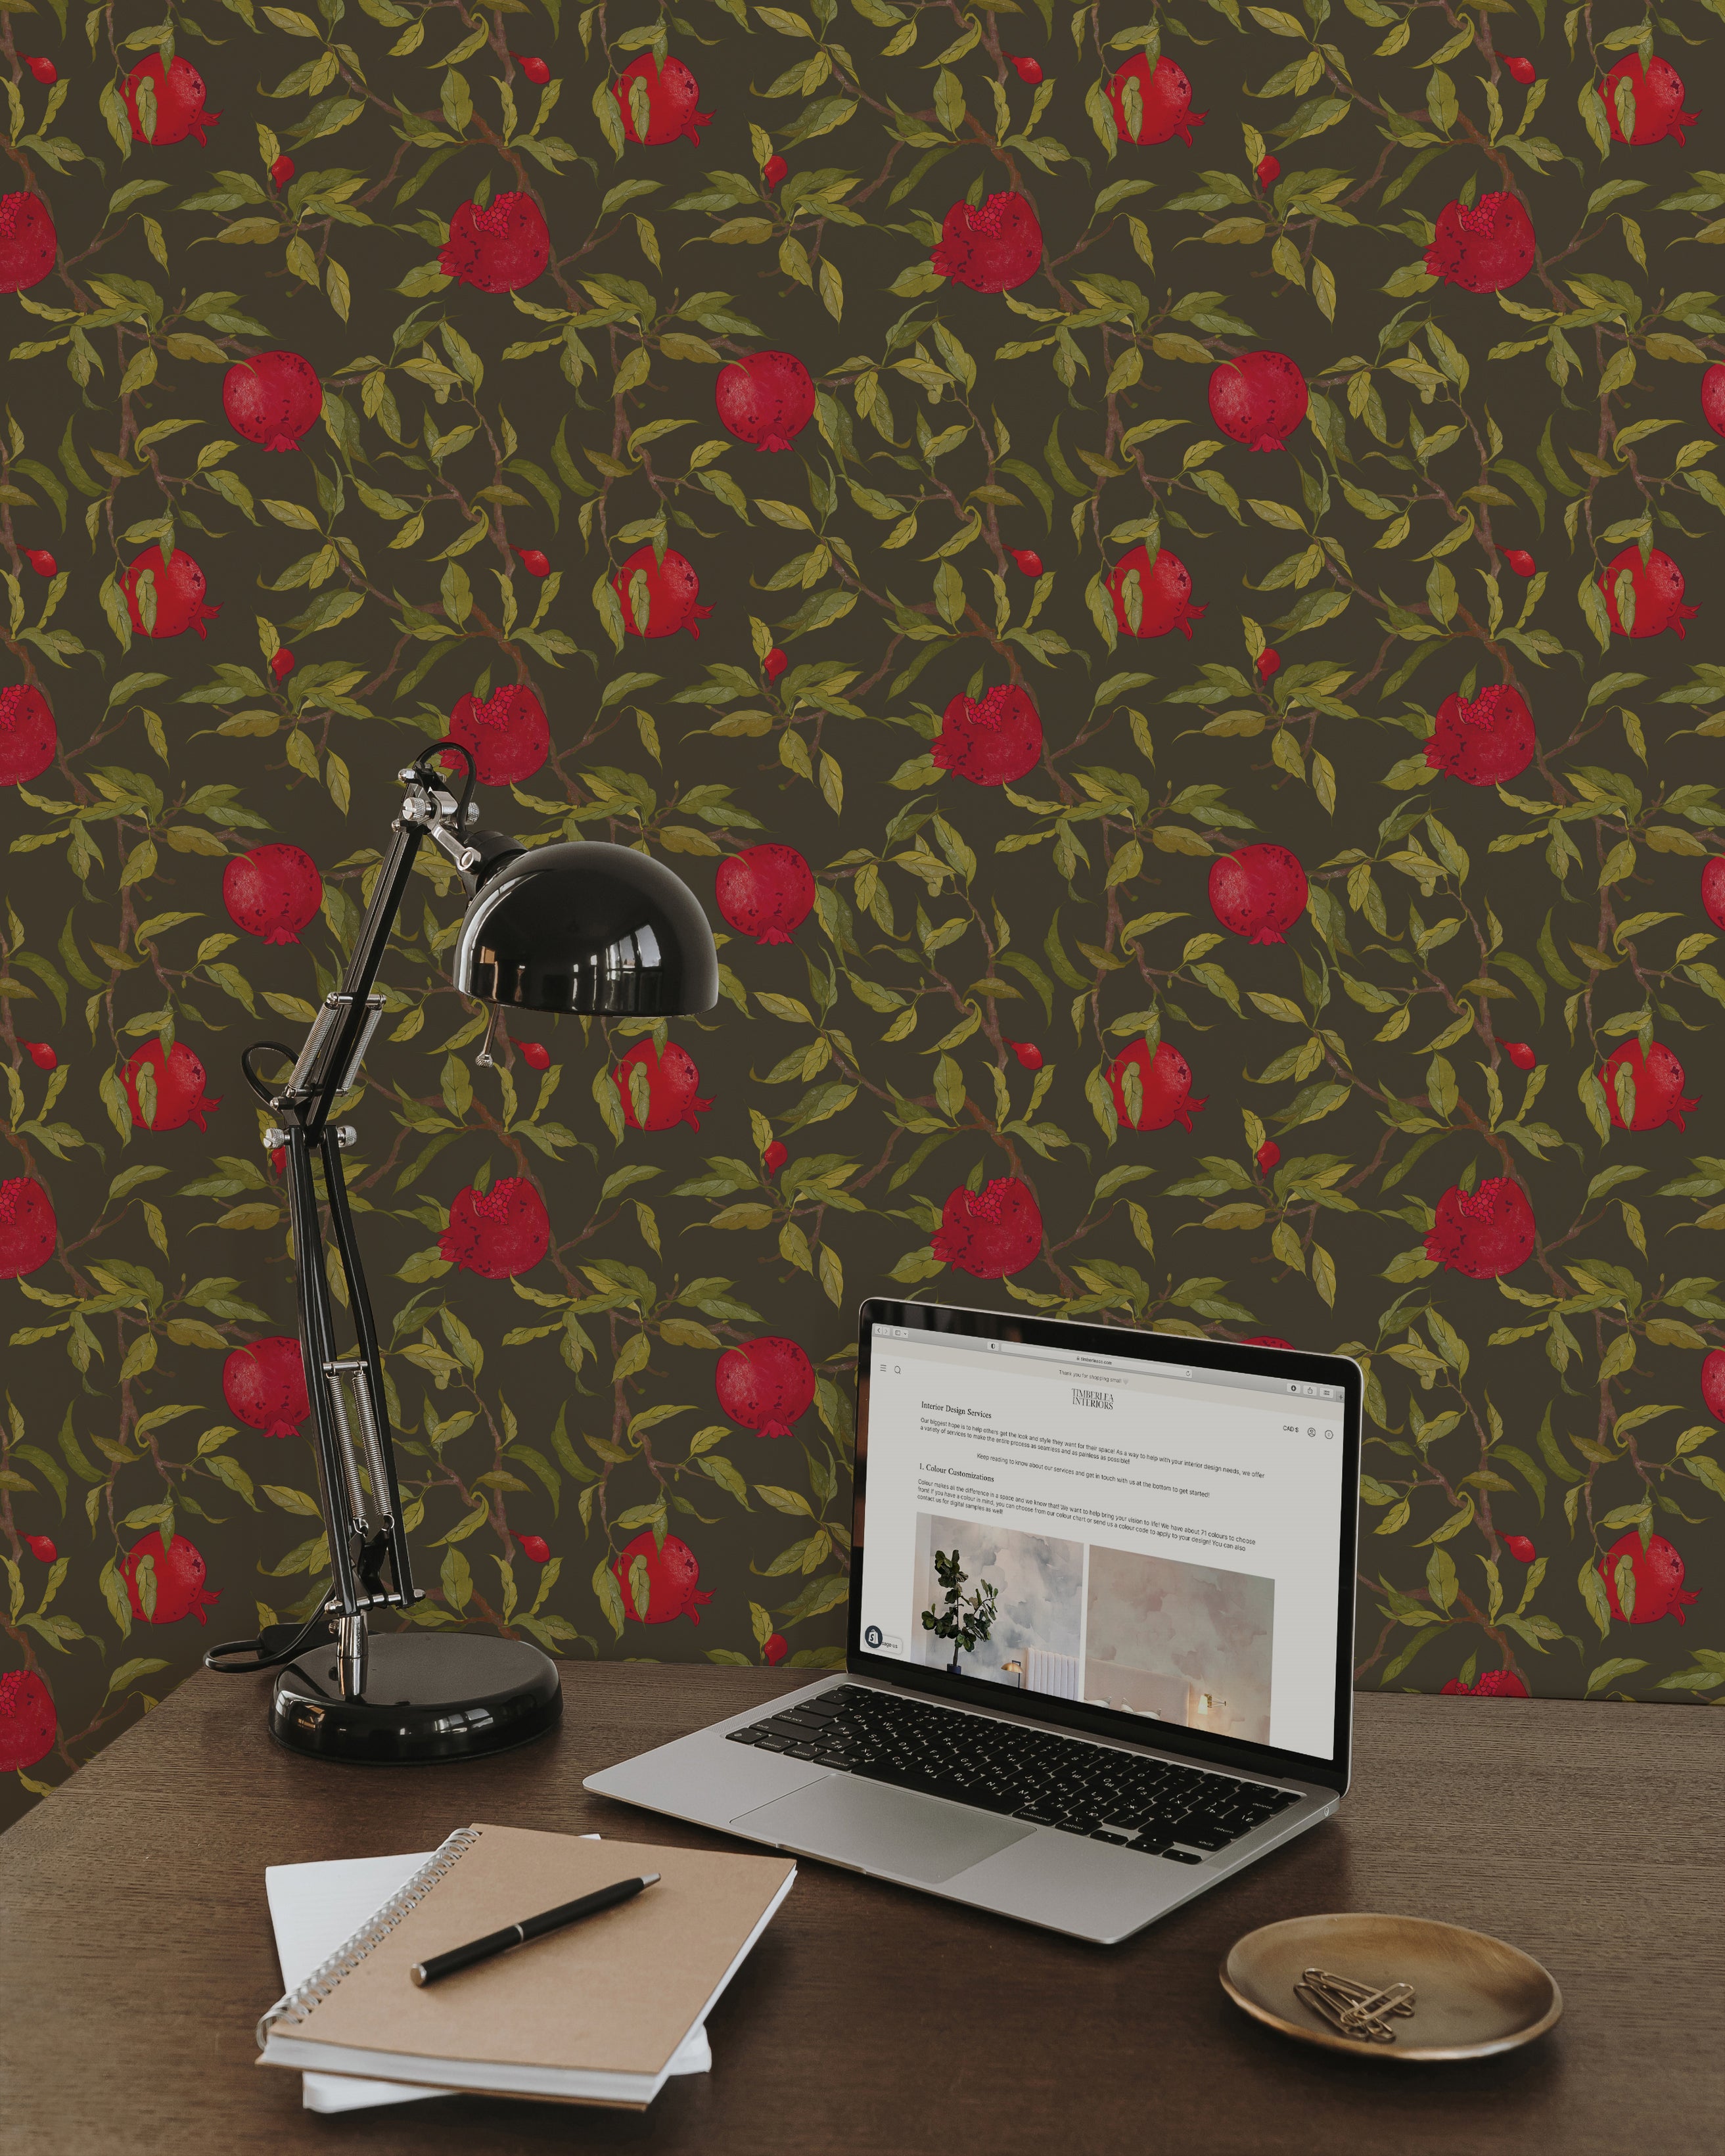 An office setup with a sleek, black desk lamp illuminating a laptop on a wooden desk, set against a background of Vintage Pomegranate Wallpaper. The wallpaper’s vivid red pomegranates and green leaves on a dark backdrop add a touch of nature-inspired elegance to the workspace.